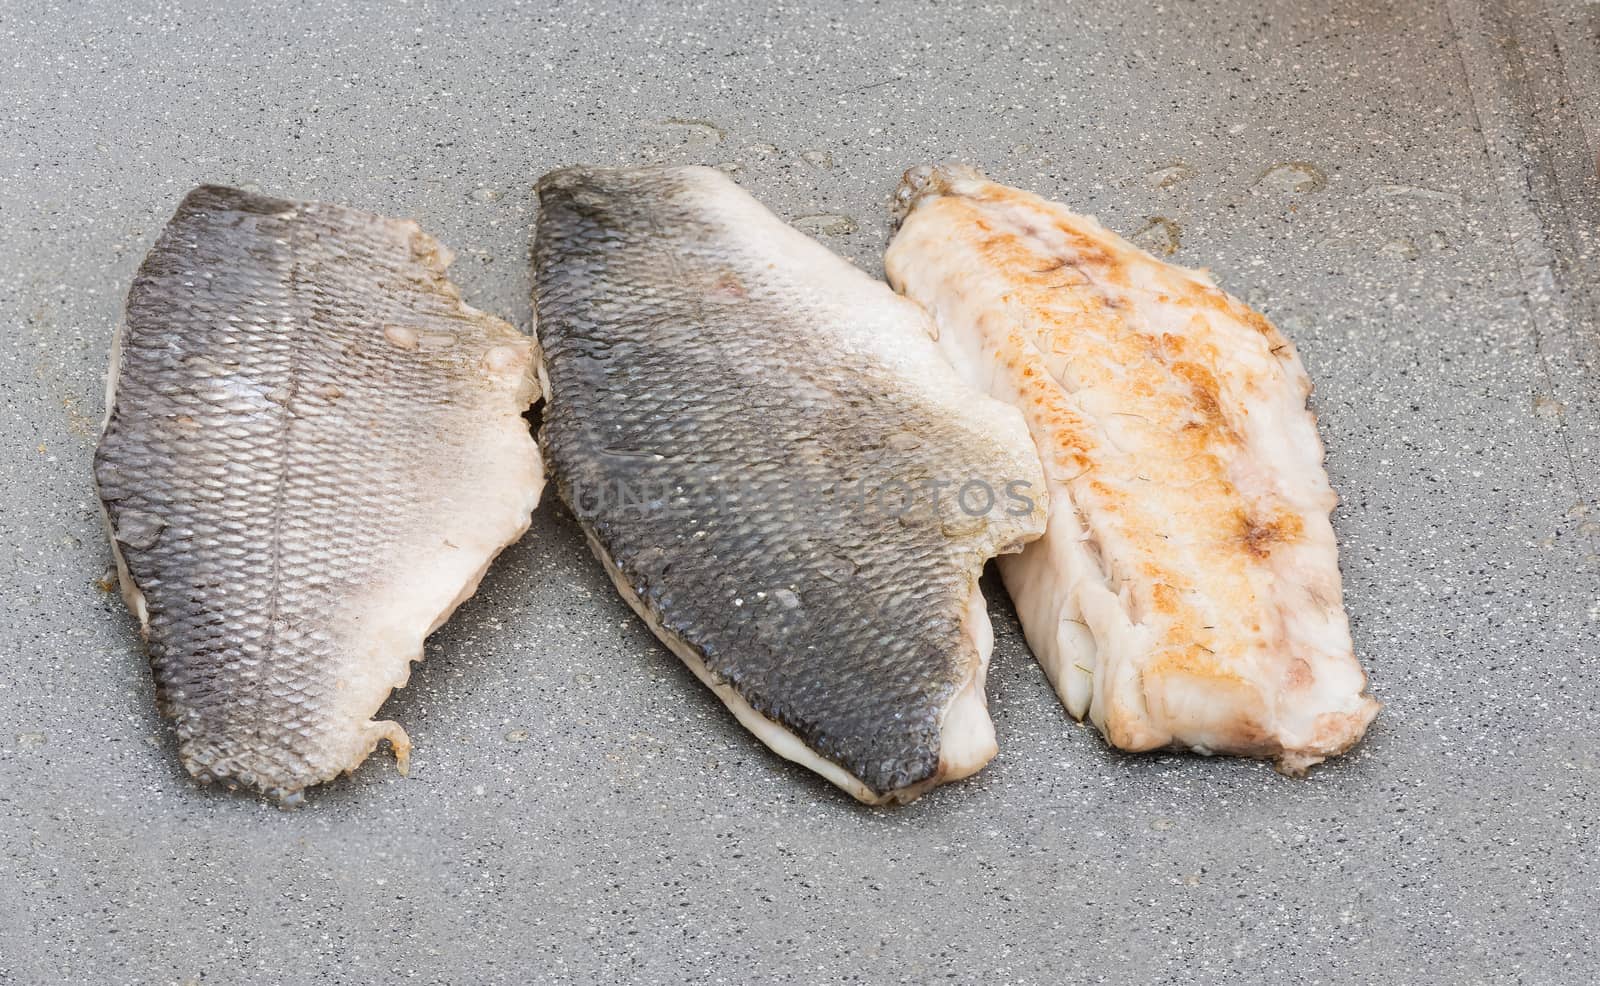 Pictured three fillets of sea bream cooked on the grill